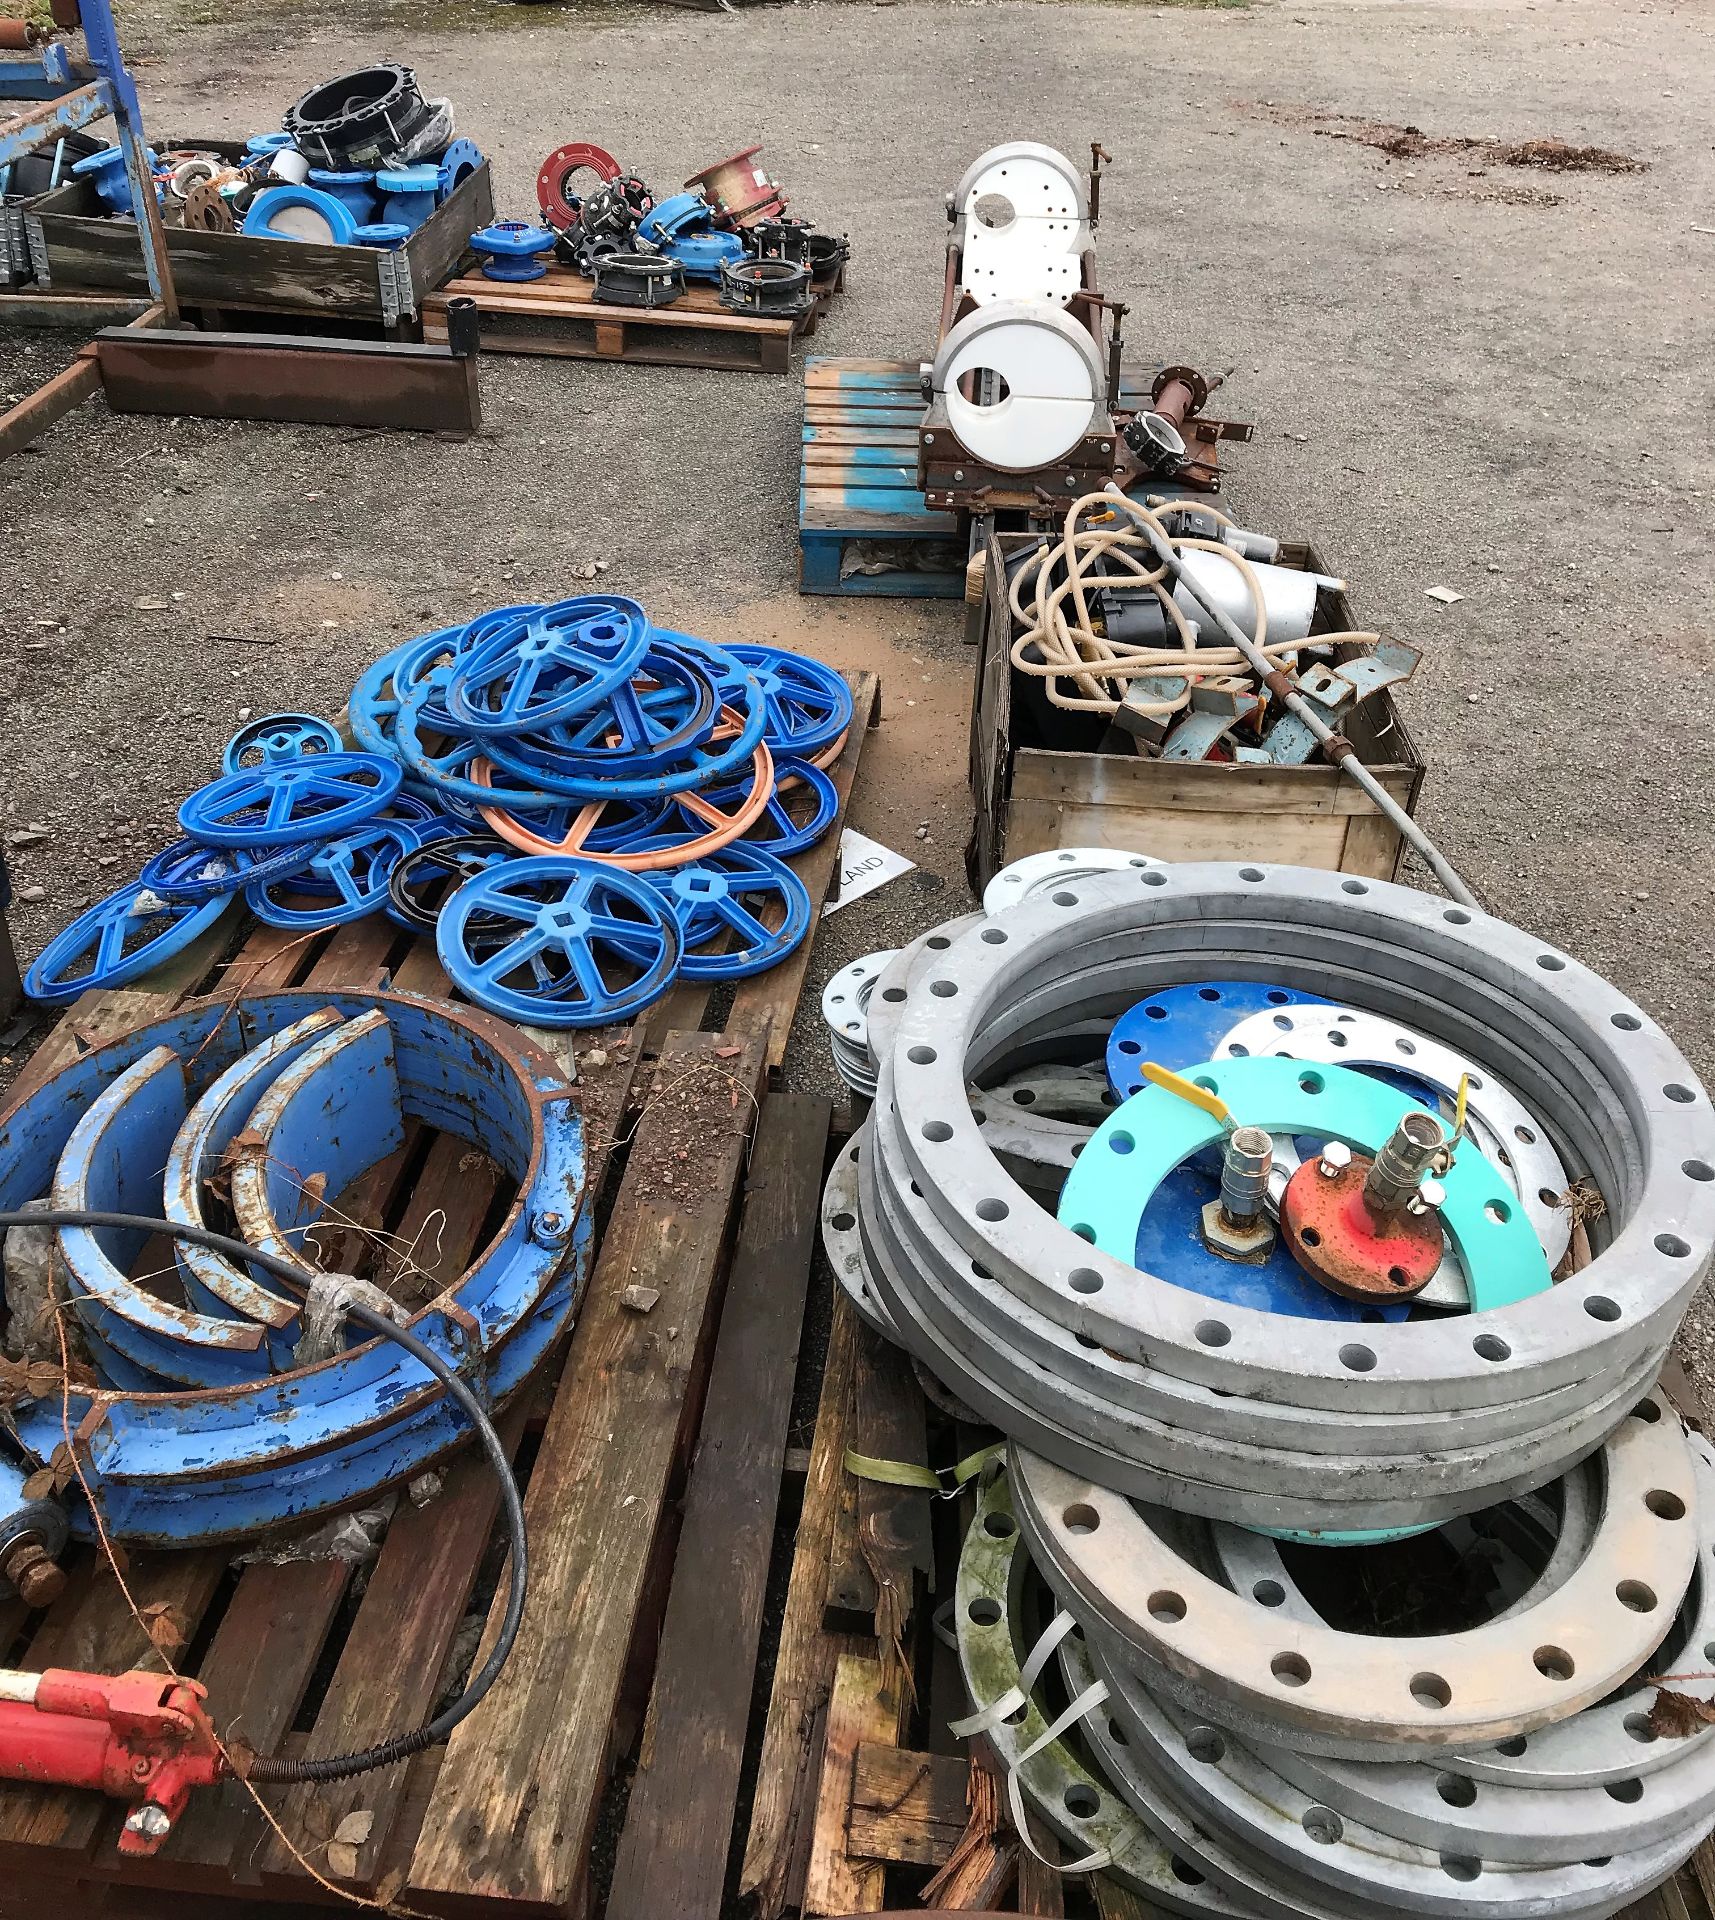 A Miscellaneous Lot of Backing Rings, Re-rounding Clamps, Fly Wheels and Sundry Equipment on 9